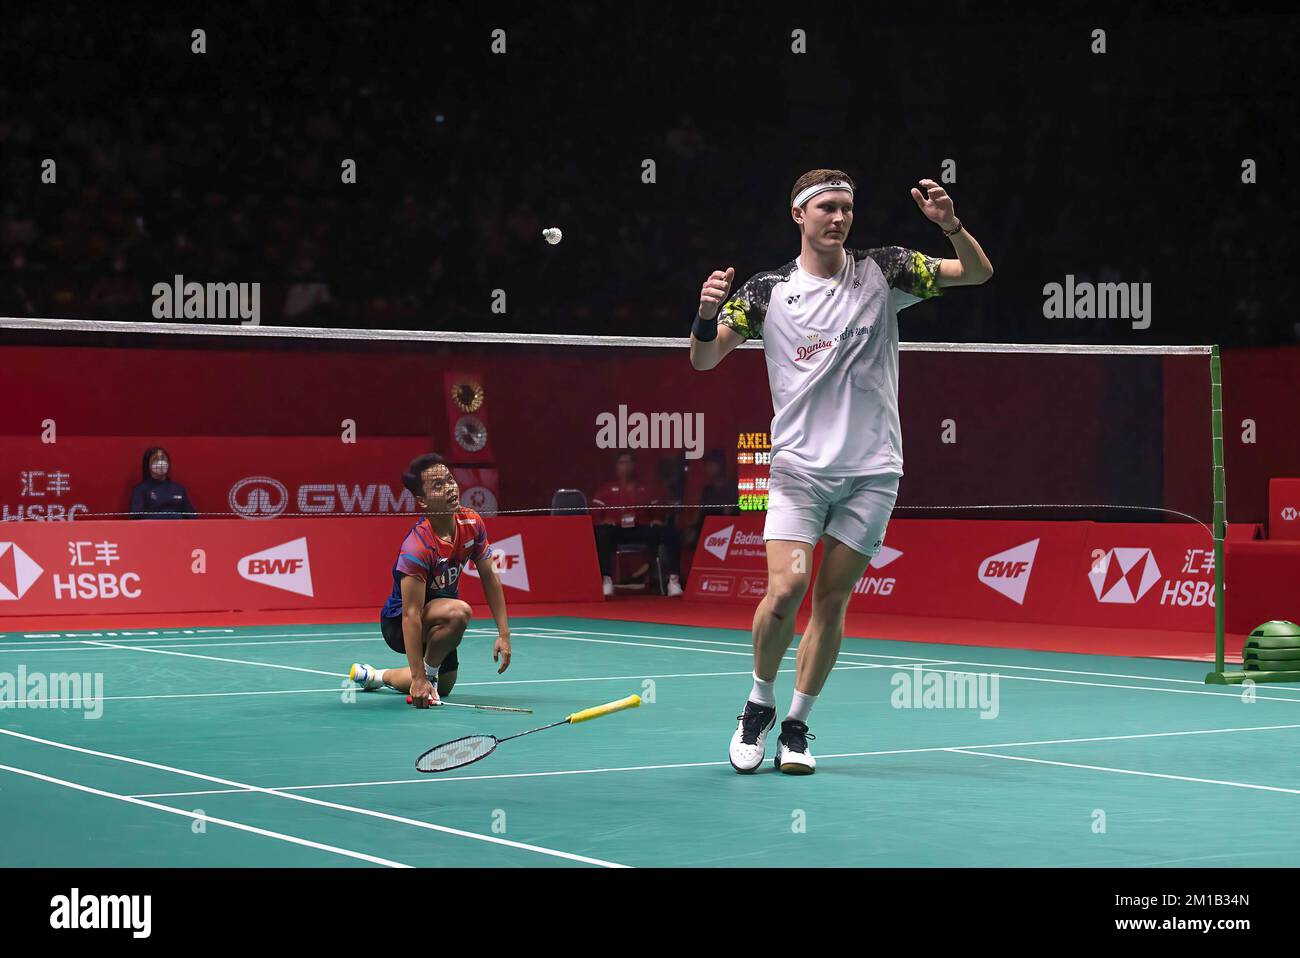 Viktor Axelsen of Denmark plays against Anthony Sinisuka Ginting of  Indonesia during the Badminton Men's single Final match in the HSBC BWF  World Tour Finals 2022 at Nimibutr Stadium. Viktor Axelsen won